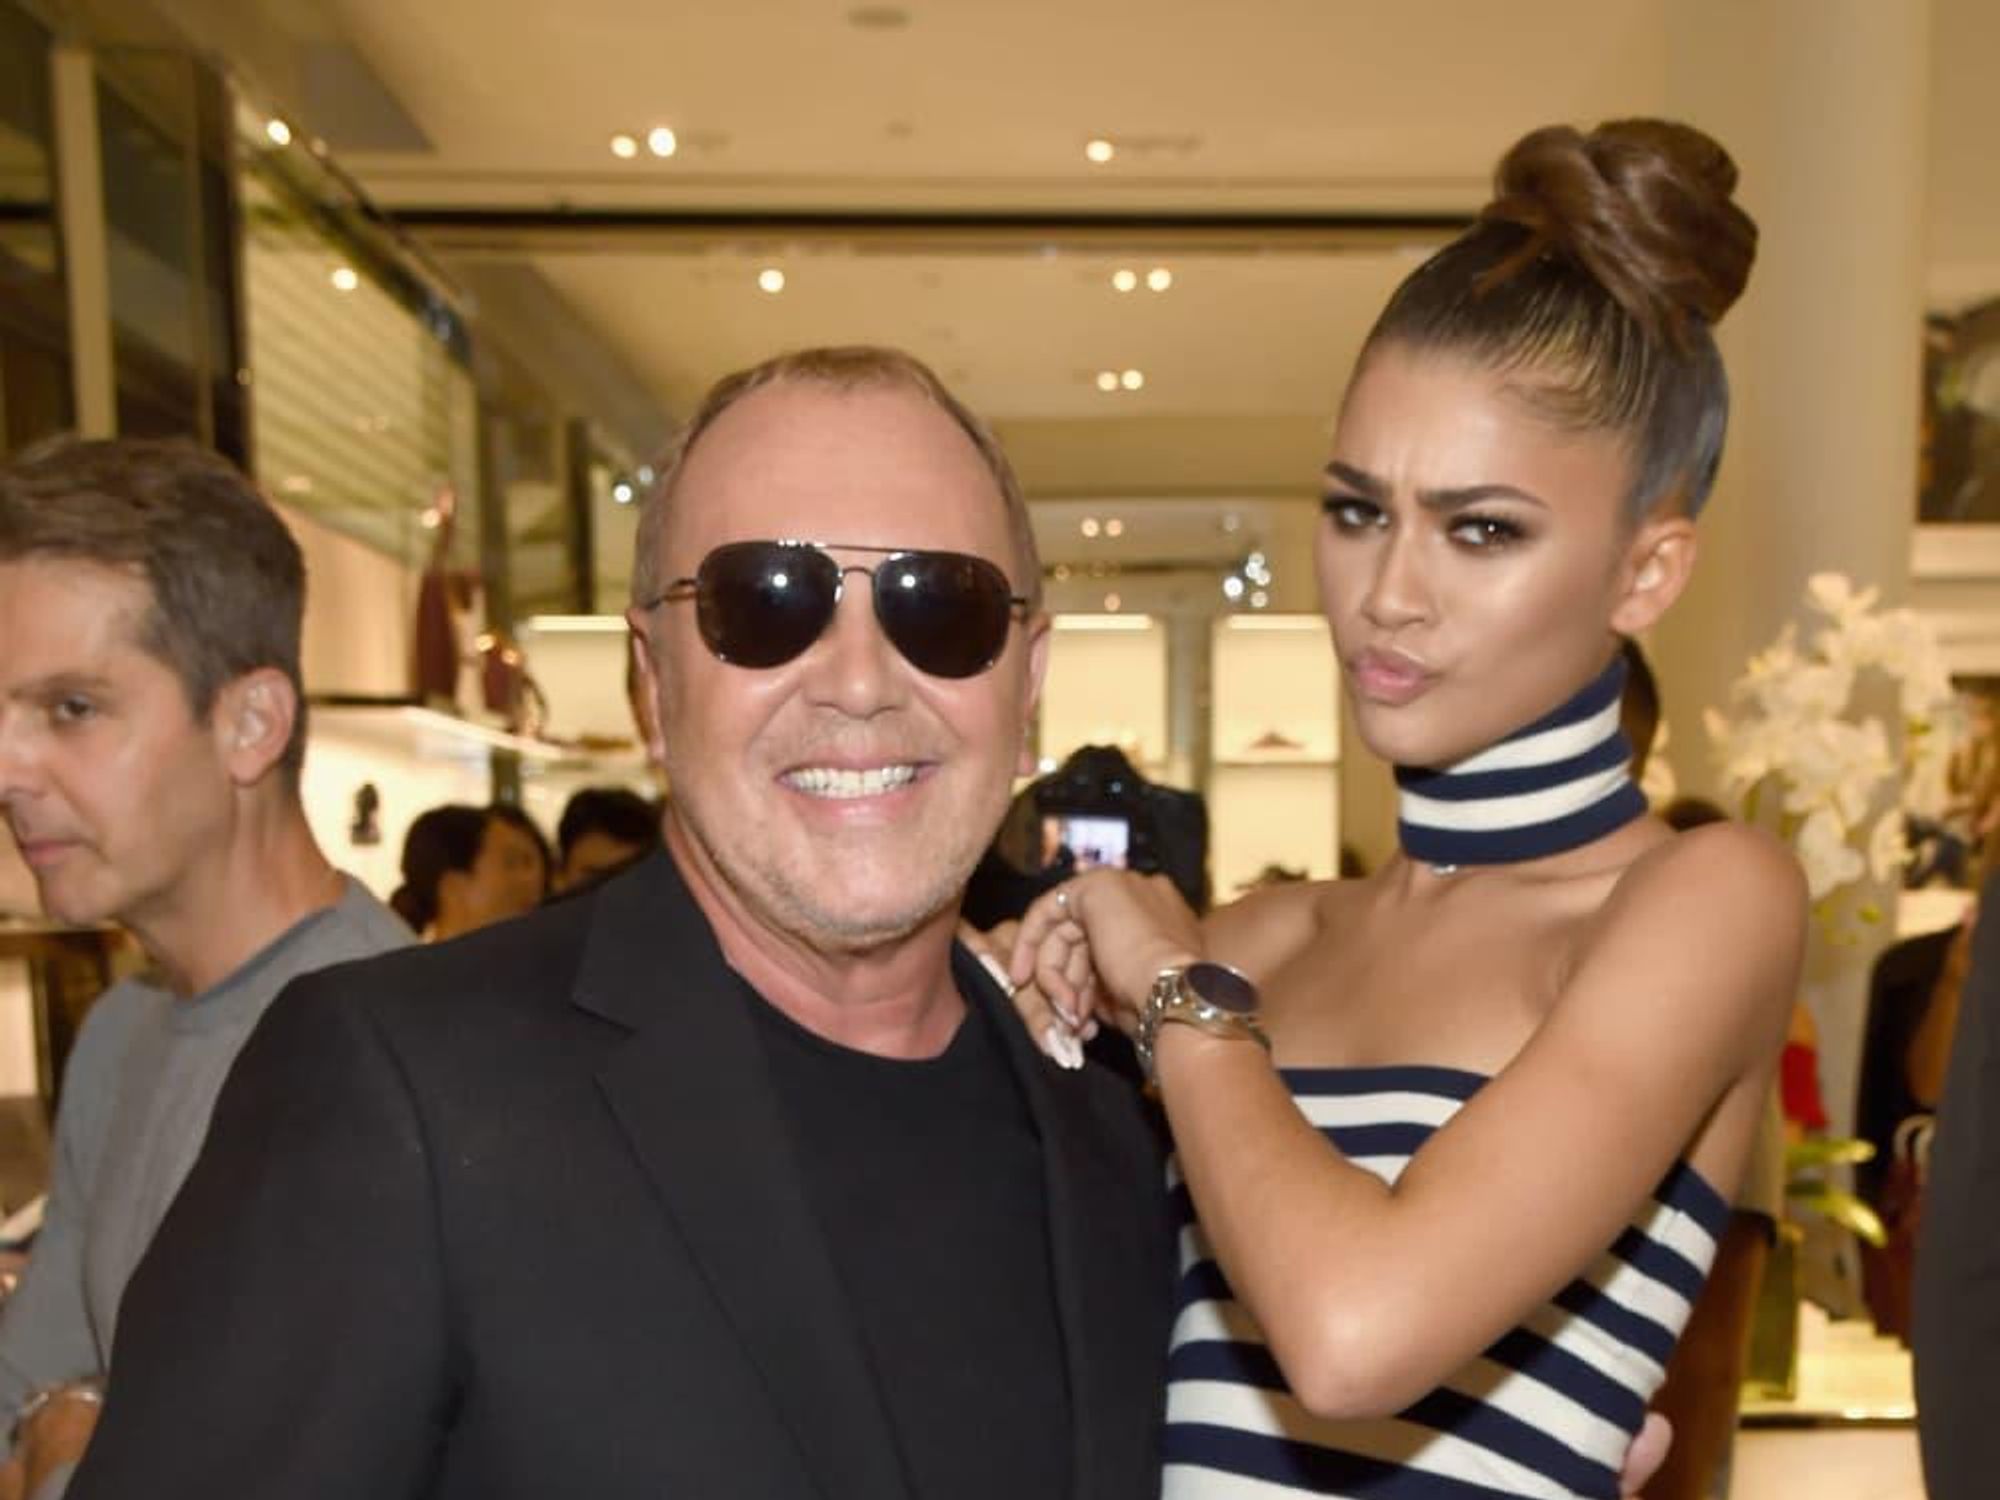 Zendaya and Michael Kors at watch launch party